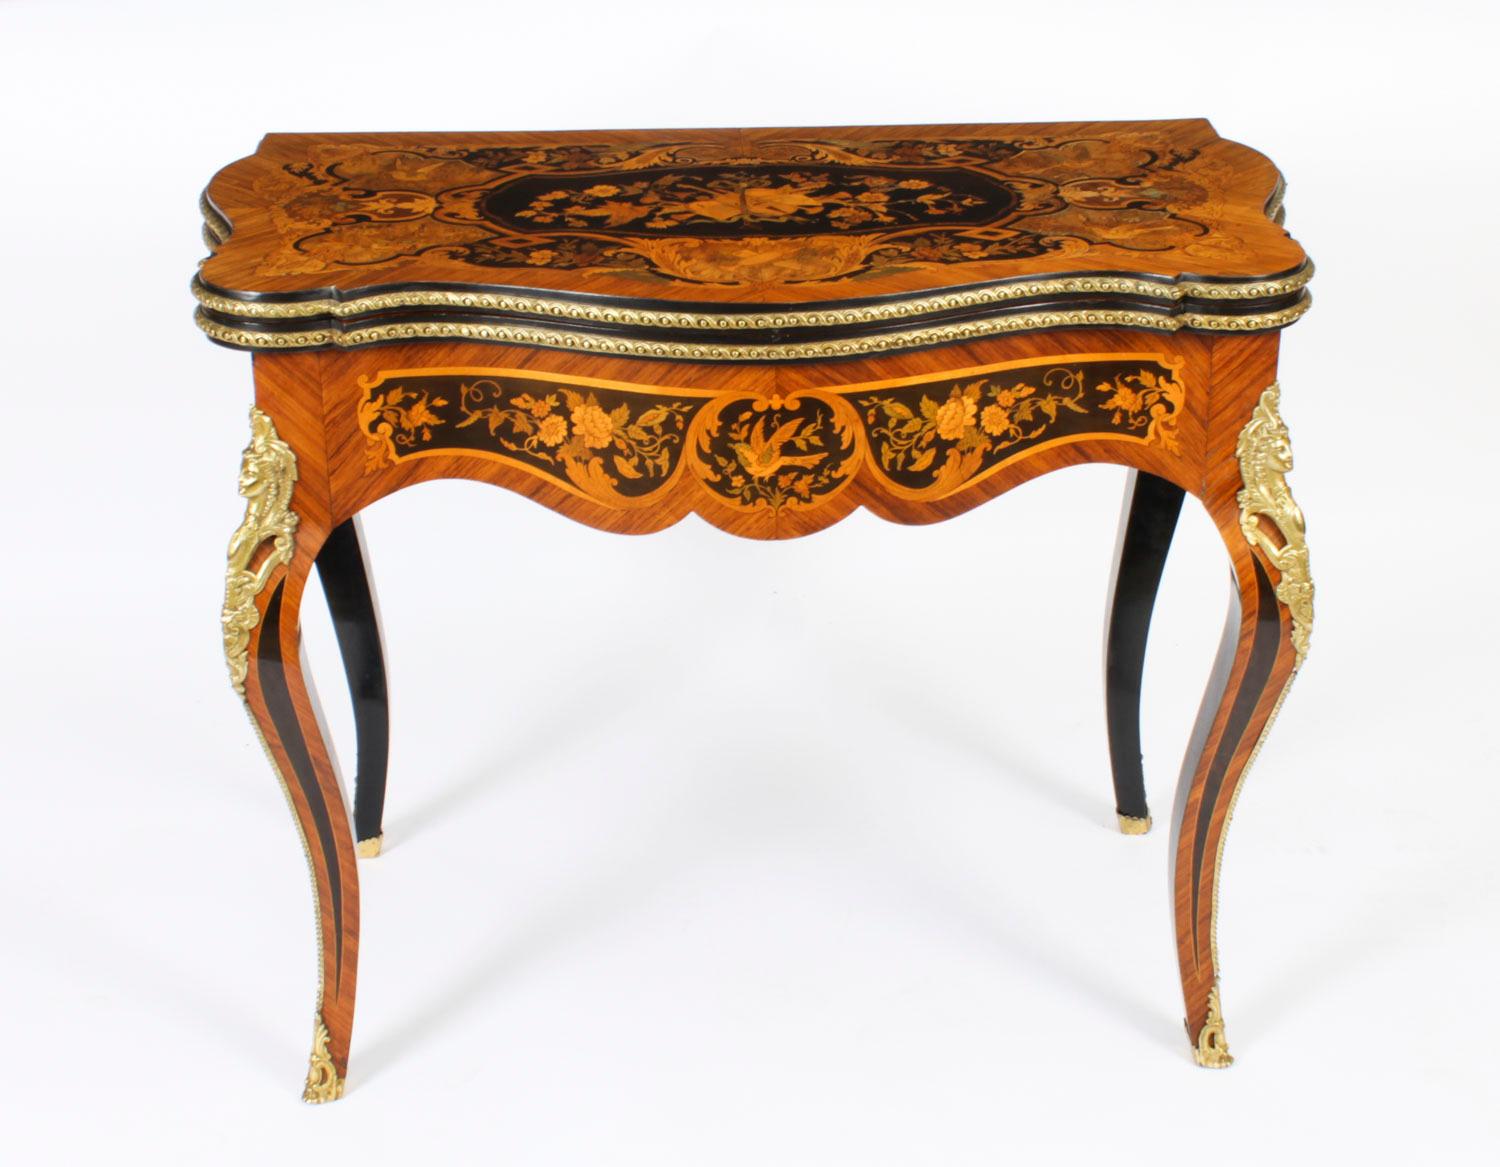 This is a stunning 19th century antique French Louis XV Revival ormolu and floral marquetry shaped rectangular card table, circa 1870 in date.
 
The shaped top has banded marquetry inlay encompassing an exquisite floral marquetry bouquet of country